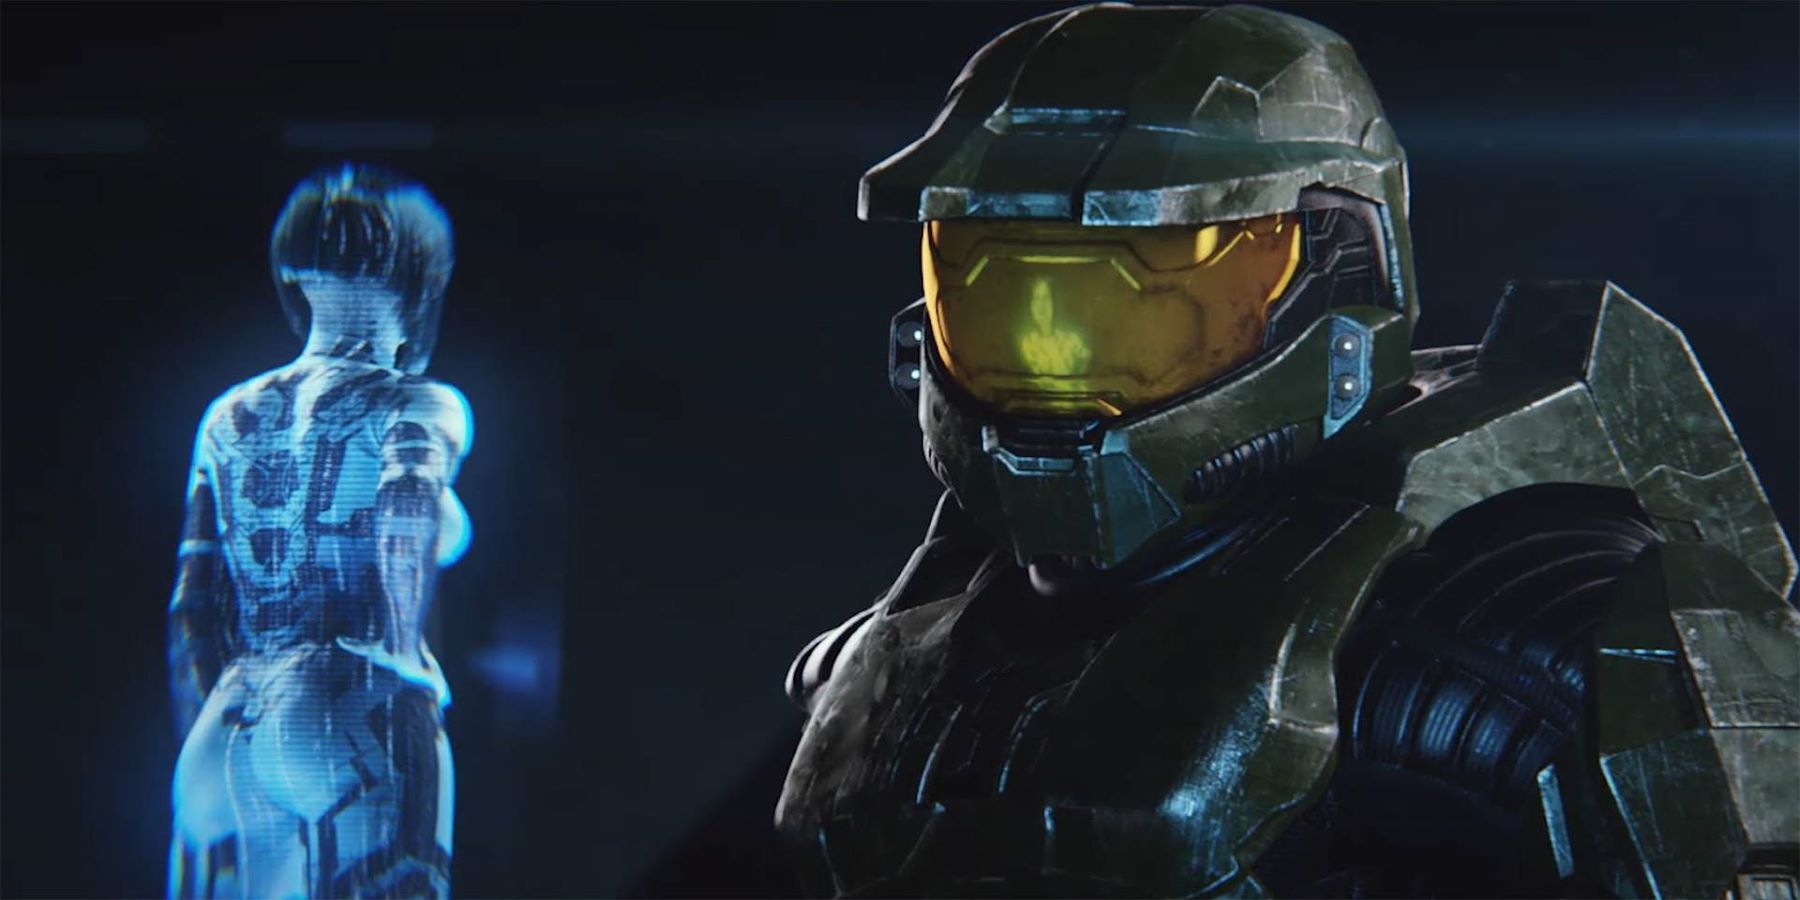 halo 2 initial release date